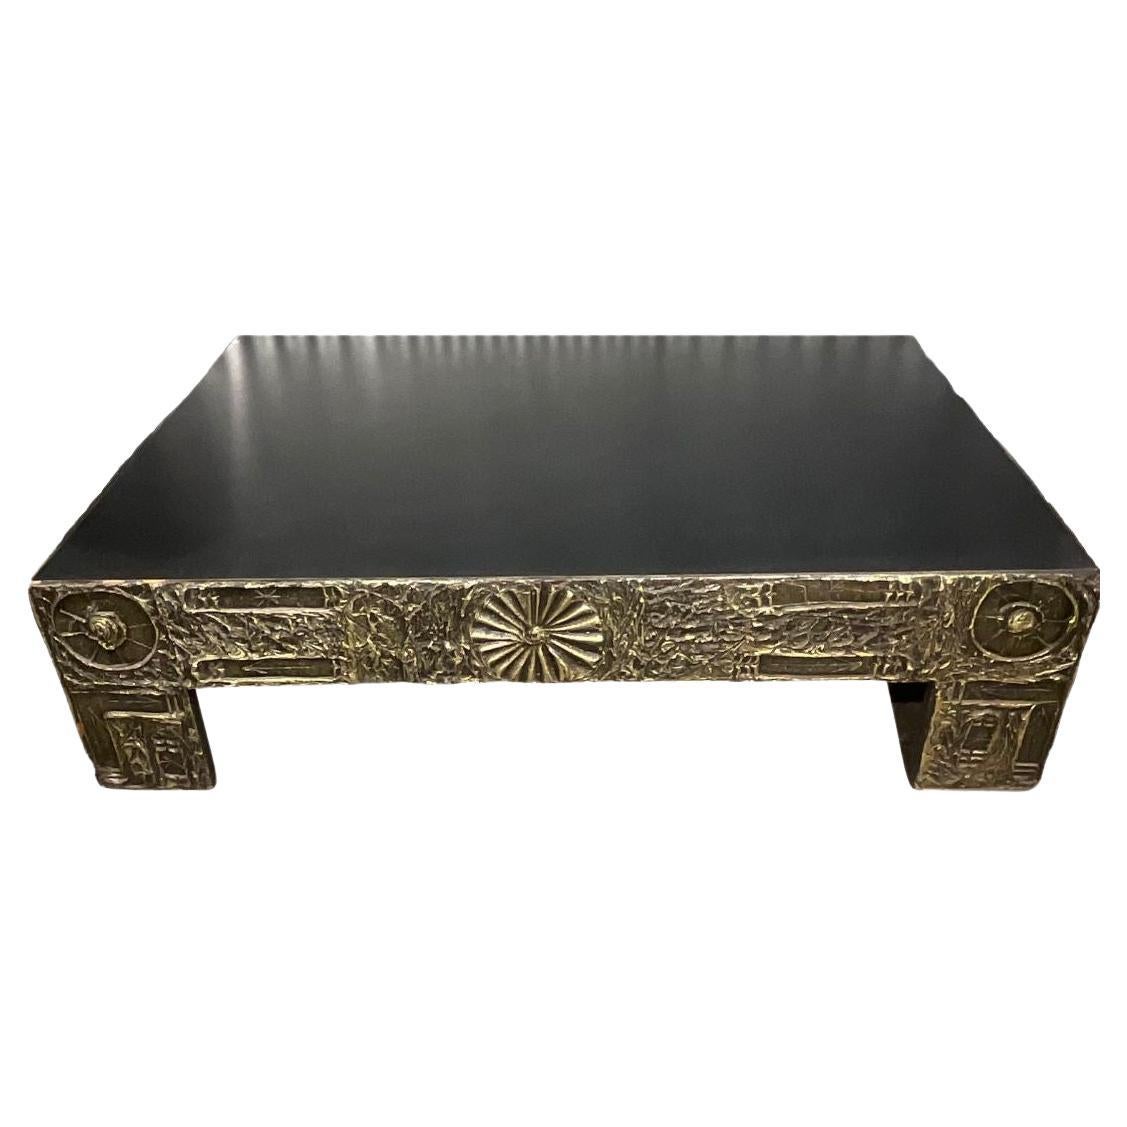 Vintage Adrian Pearsall Coffee Table